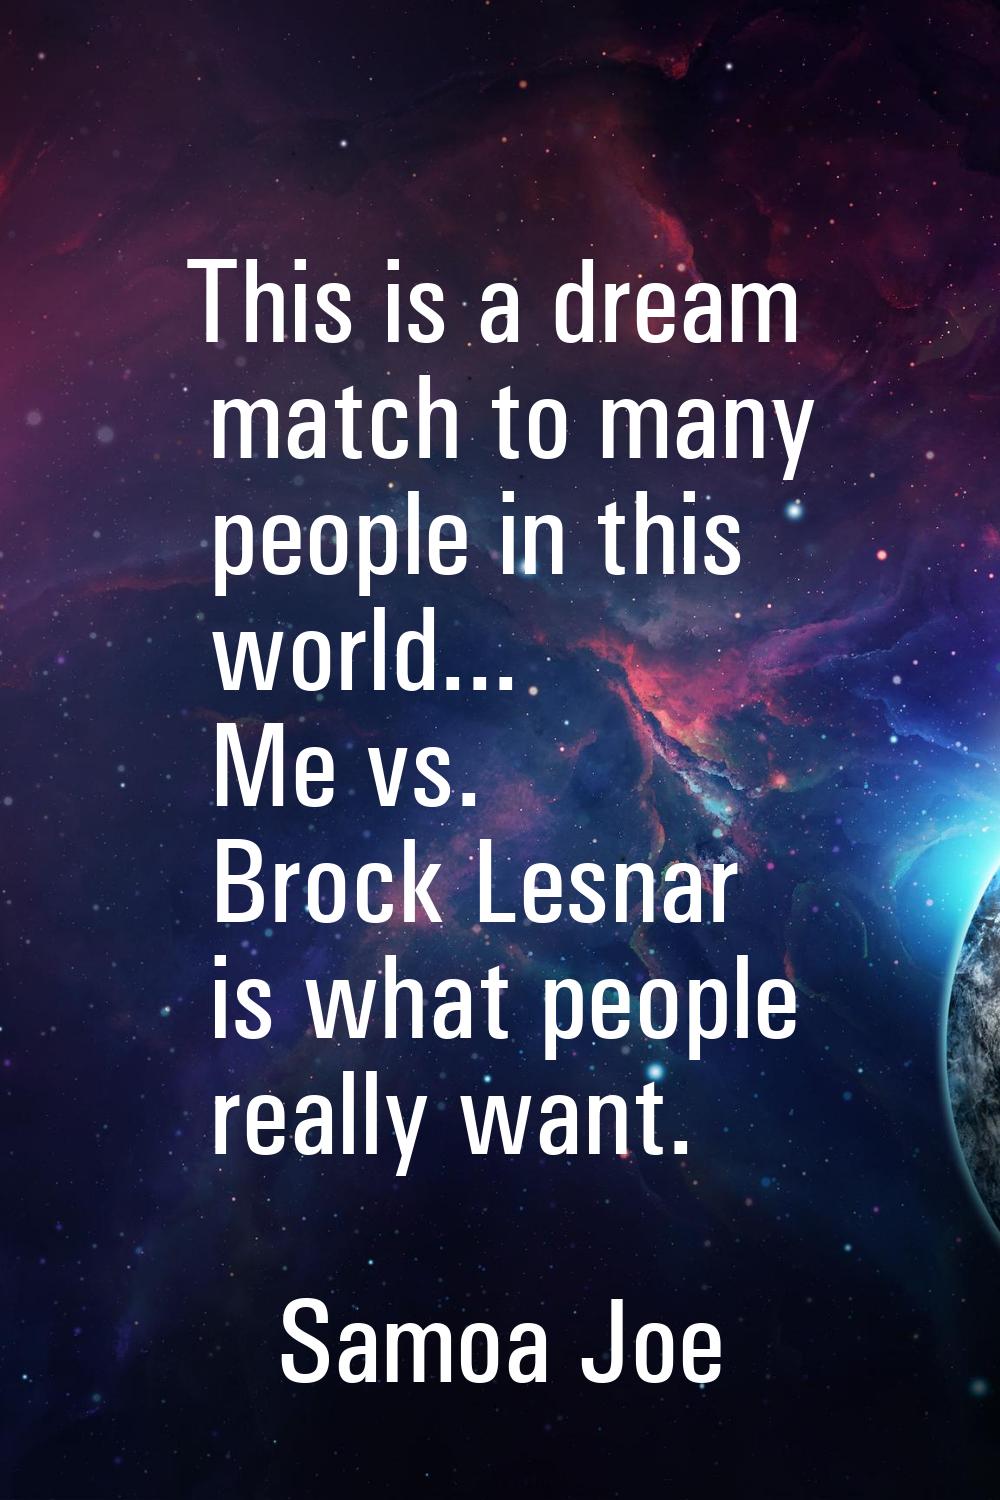 This is a dream match to many people in this world... Me vs. Brock Lesnar is what people really wan